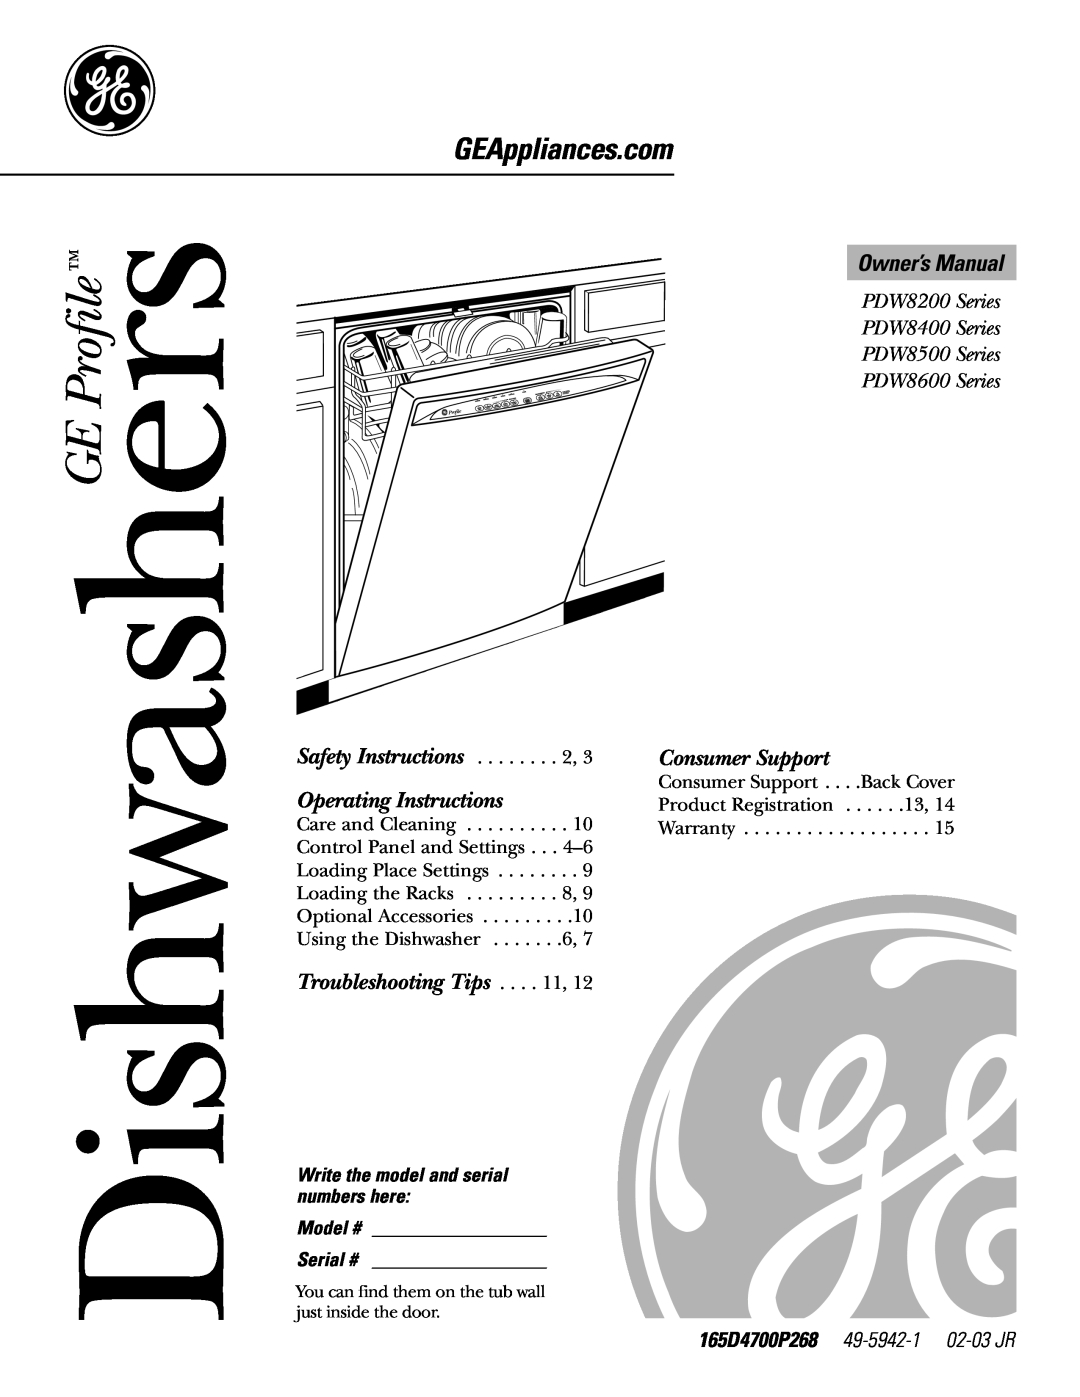 GE PDW8200, PDW8500, PDW8400 owner manual Write the model and serial numbers here Model # Serial #, Dishwashers, GE Profile 